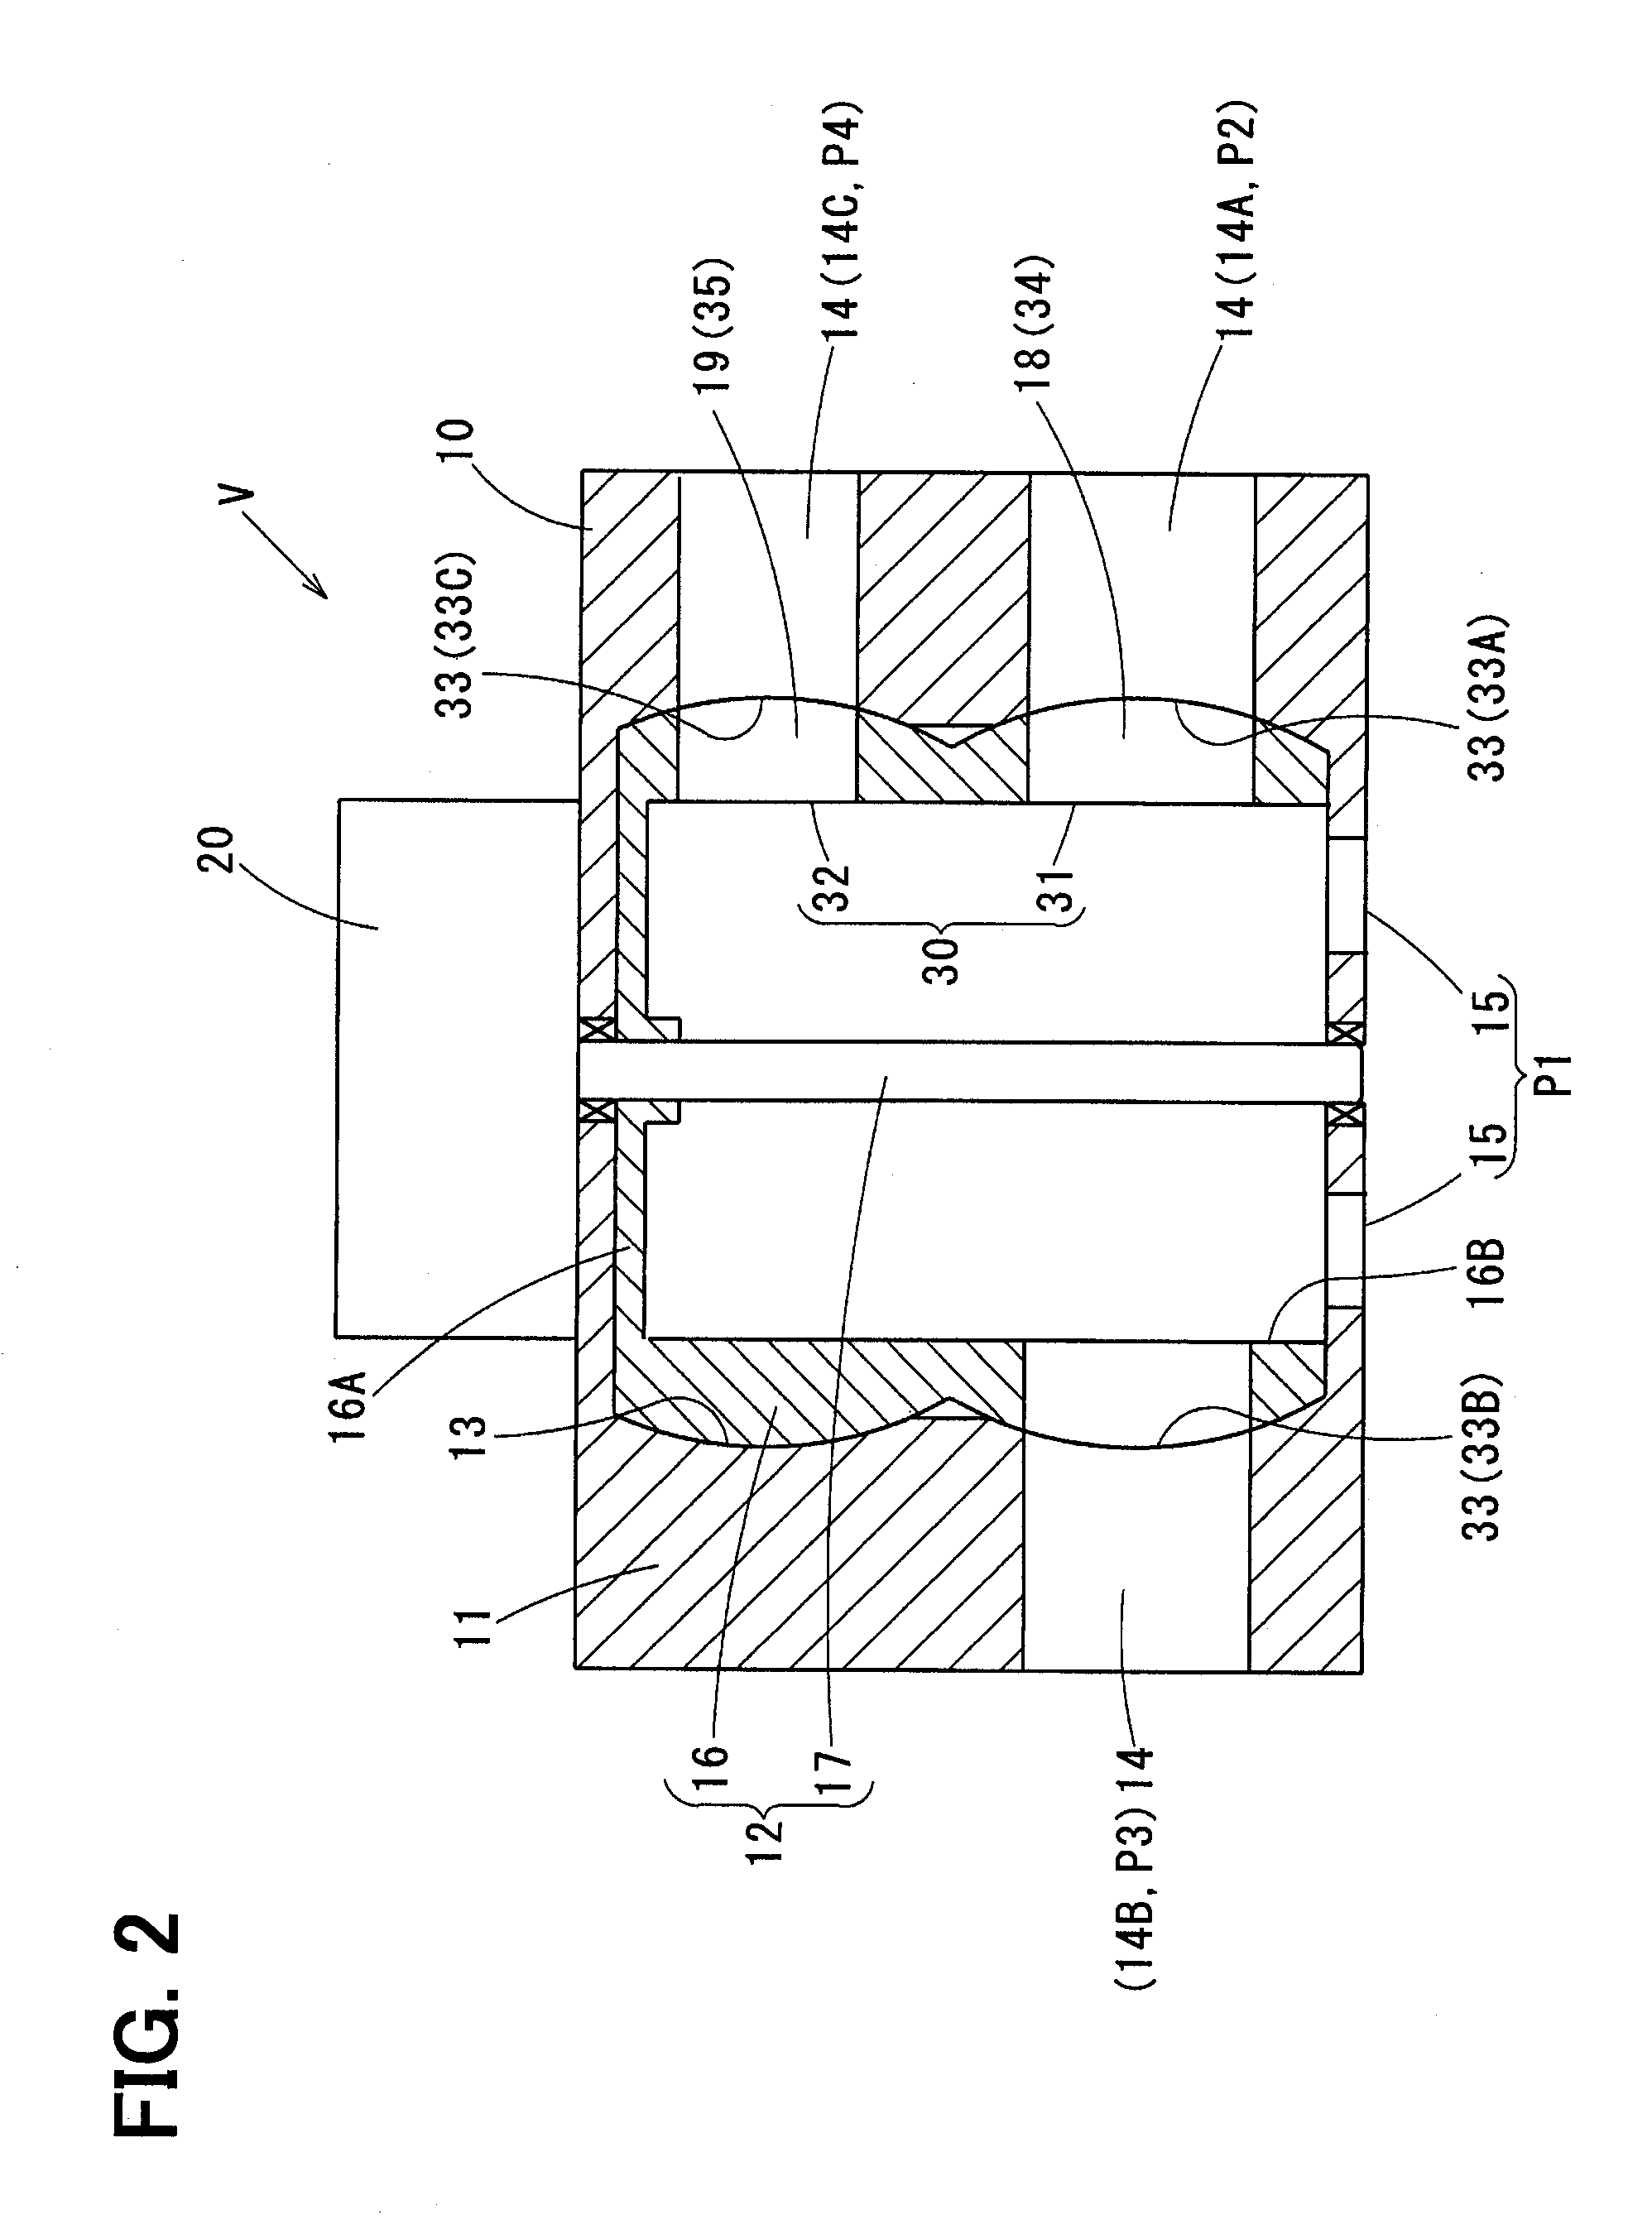 Valve device and hydraulic control system